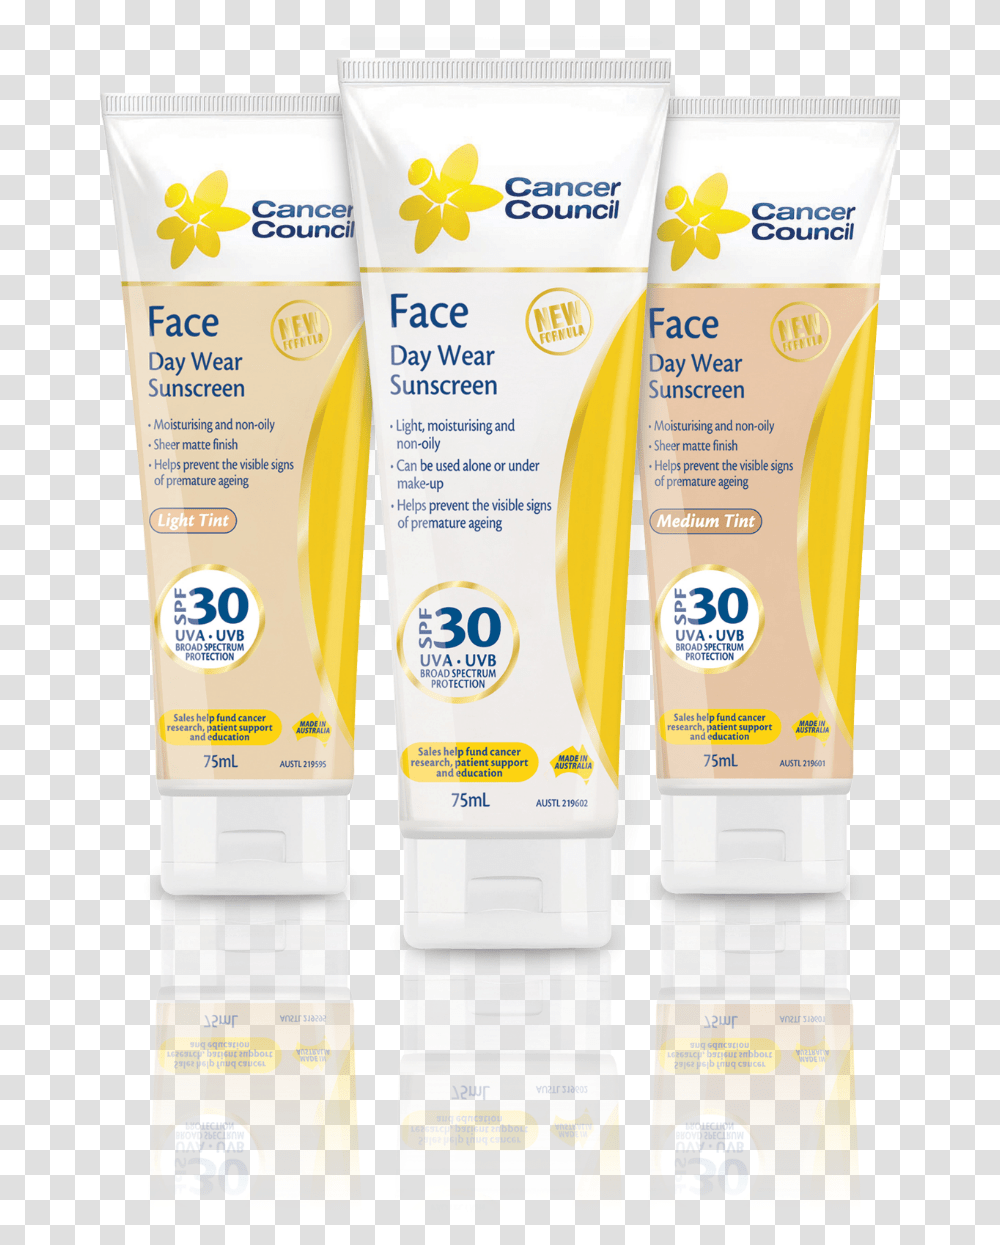 Cancer Council Tinted Sunscreen Review Download, Cosmetics, Bottle, Label Transparent Png